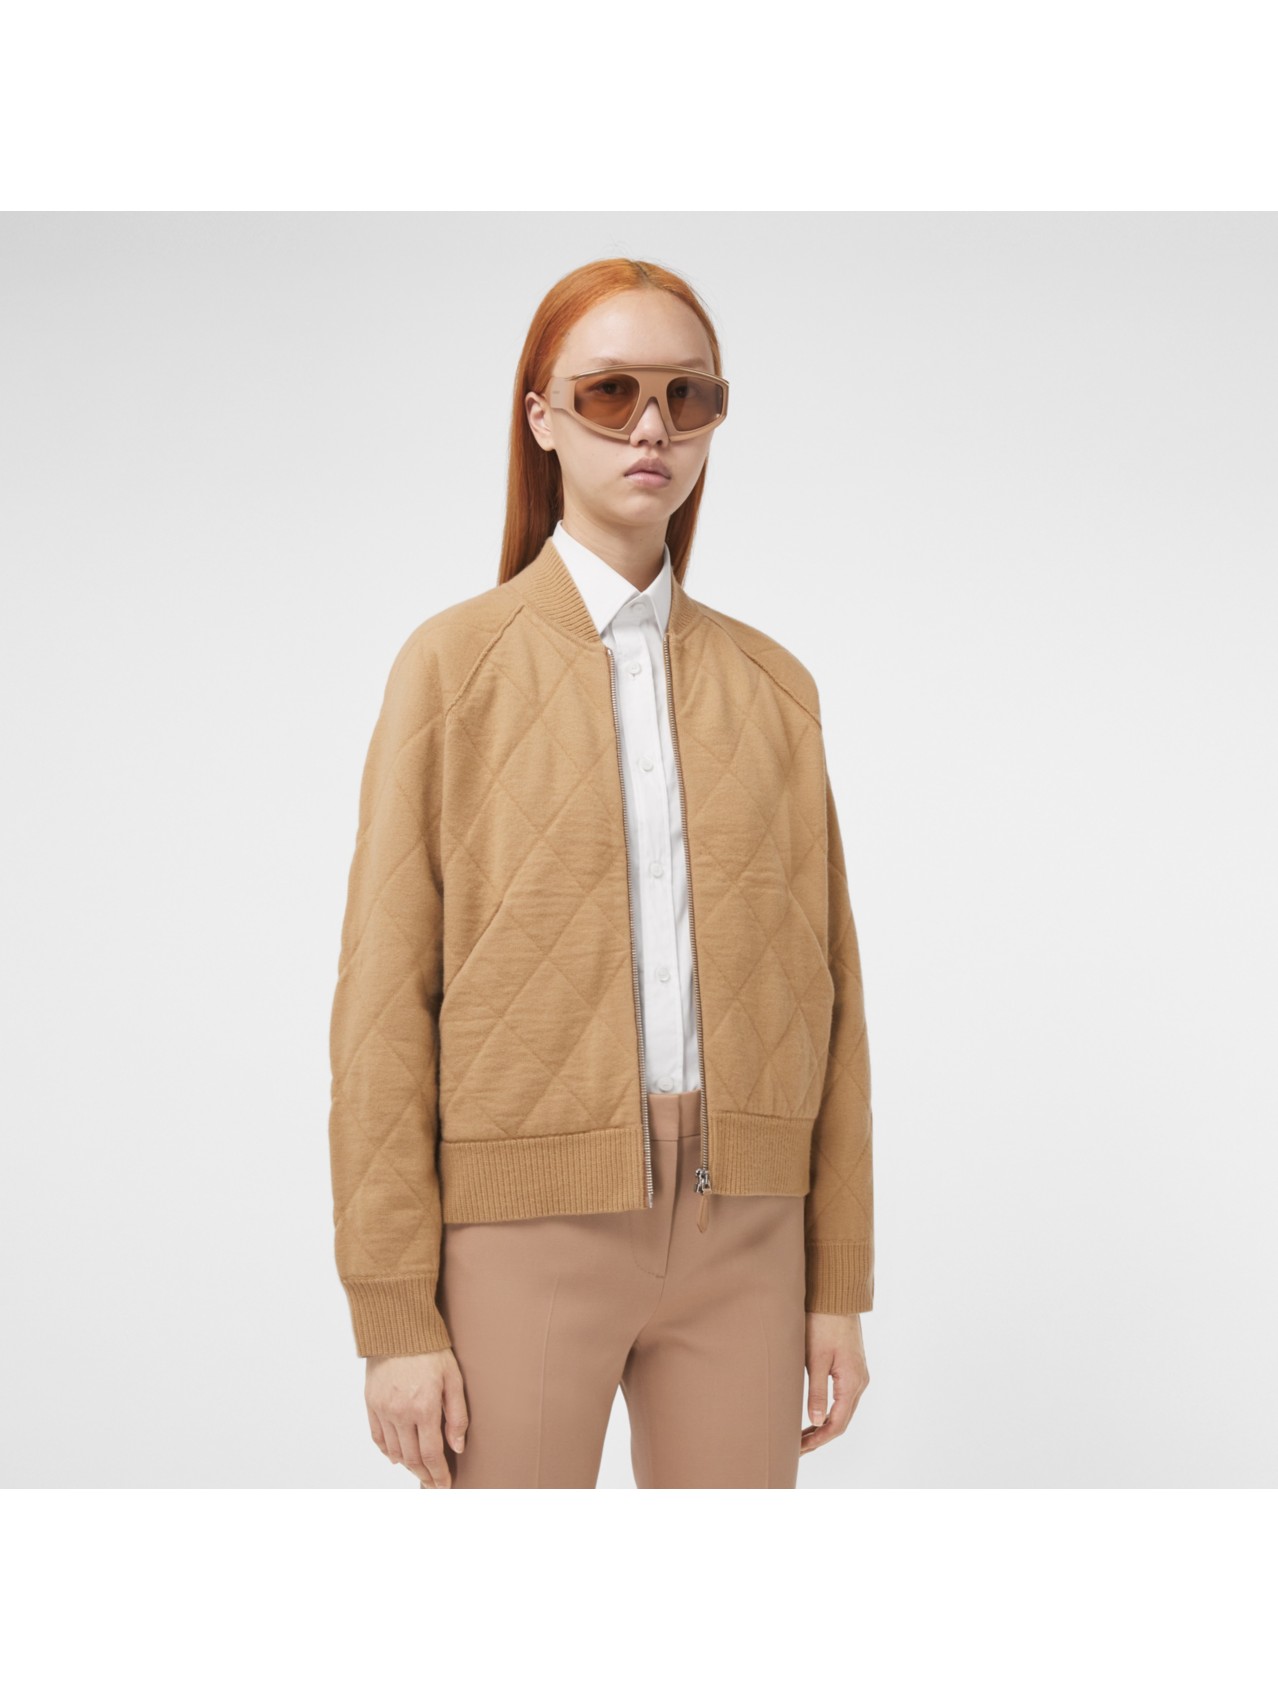 Skriv email Ved daggry chikane Diamond Quilted Wool Bomber Jacket in Camel - Women | Burberry® Official